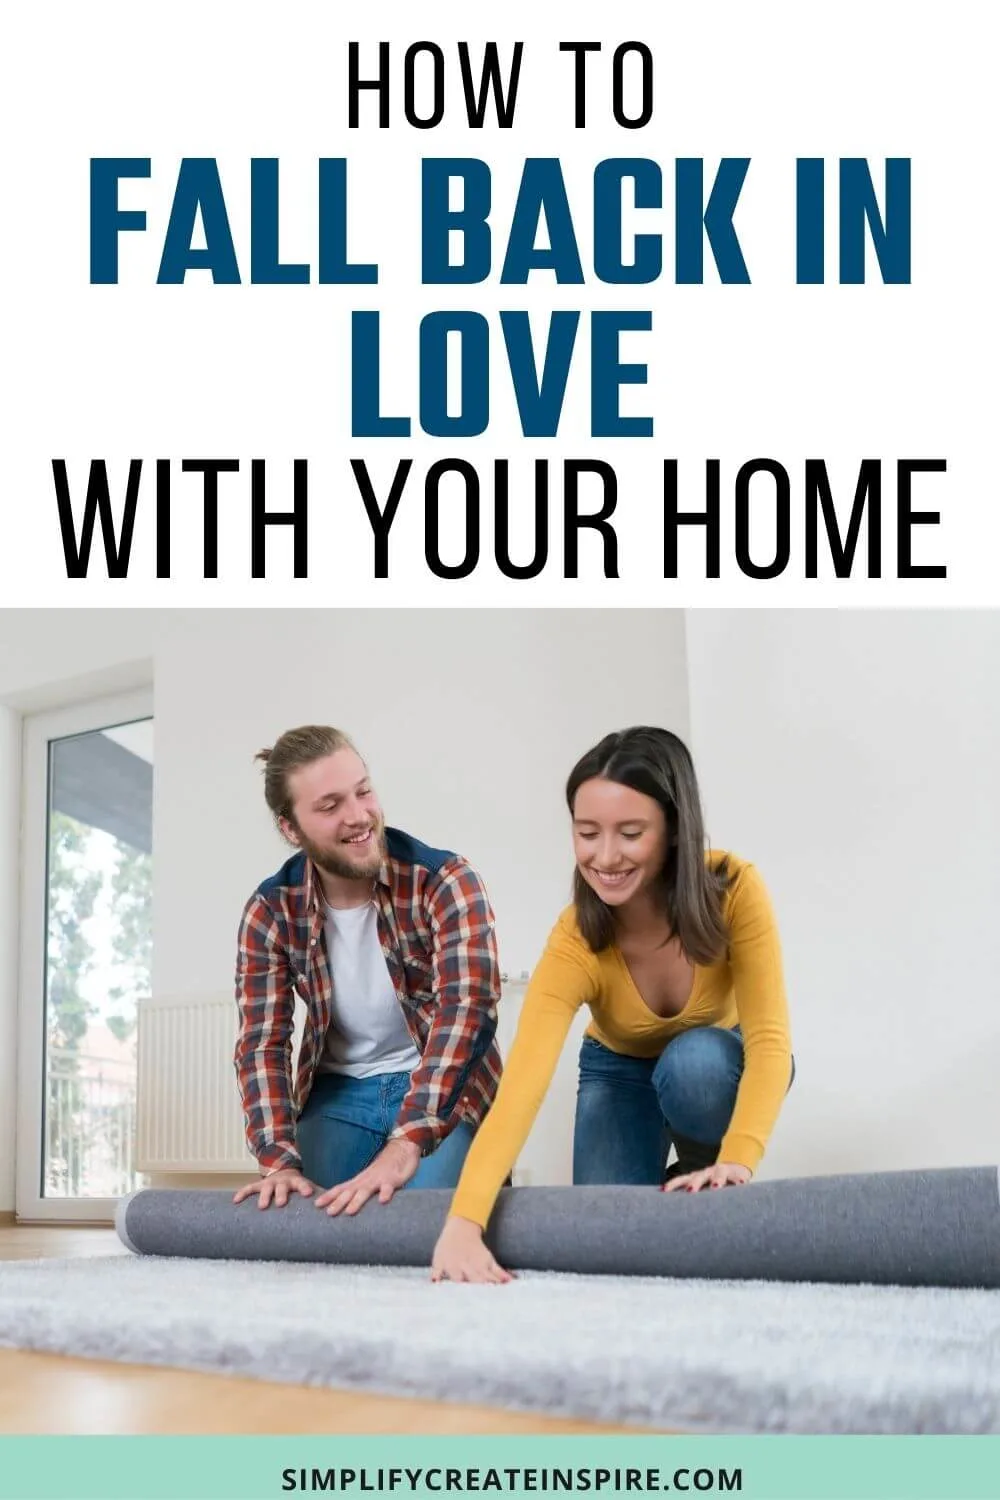 How to love your home again - home refresh